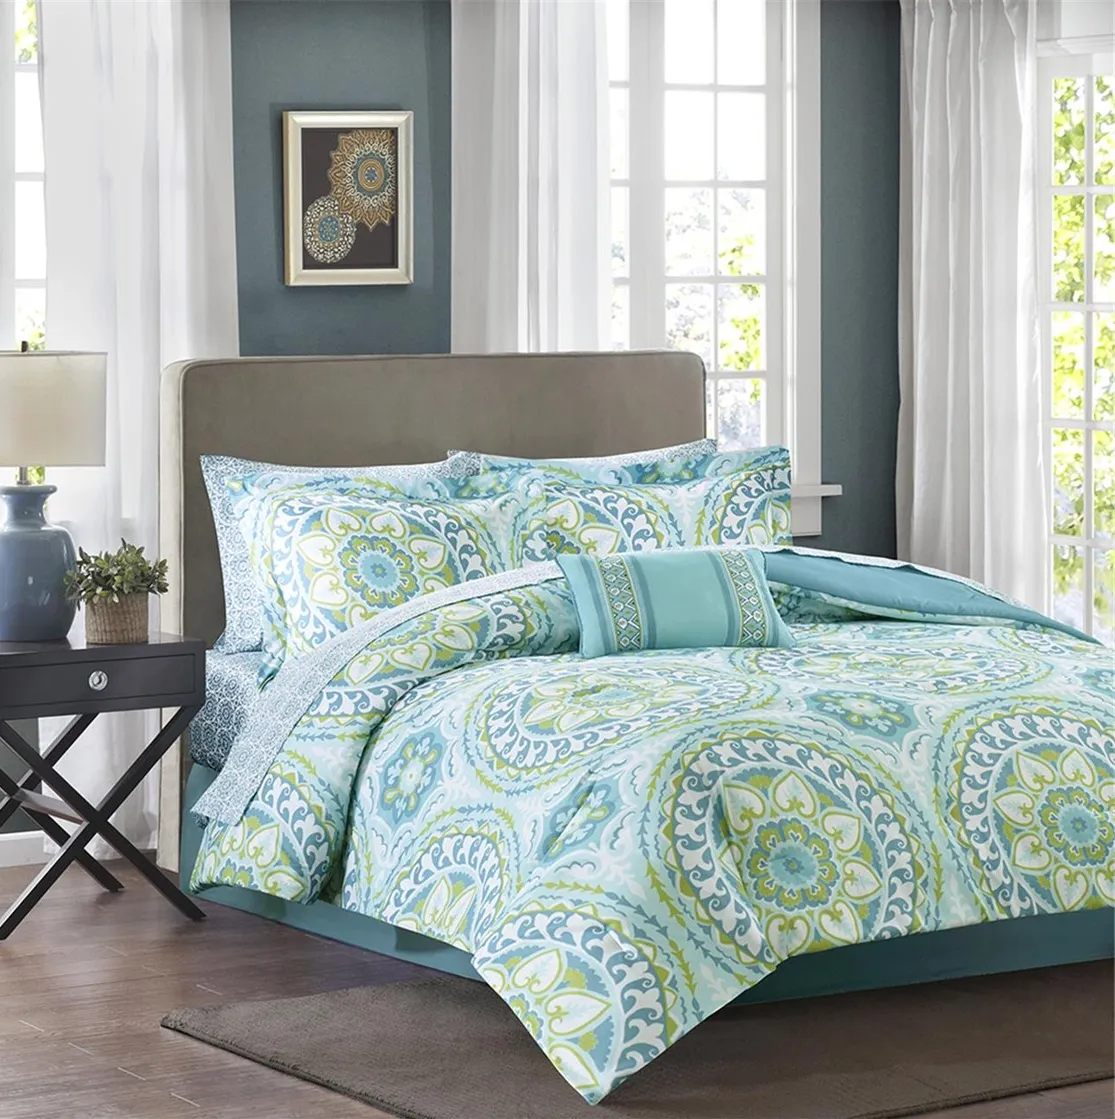 Olliix by Madison Park Essentials Serenity Aqua King Complete Comforter and Cotton Sheet Set